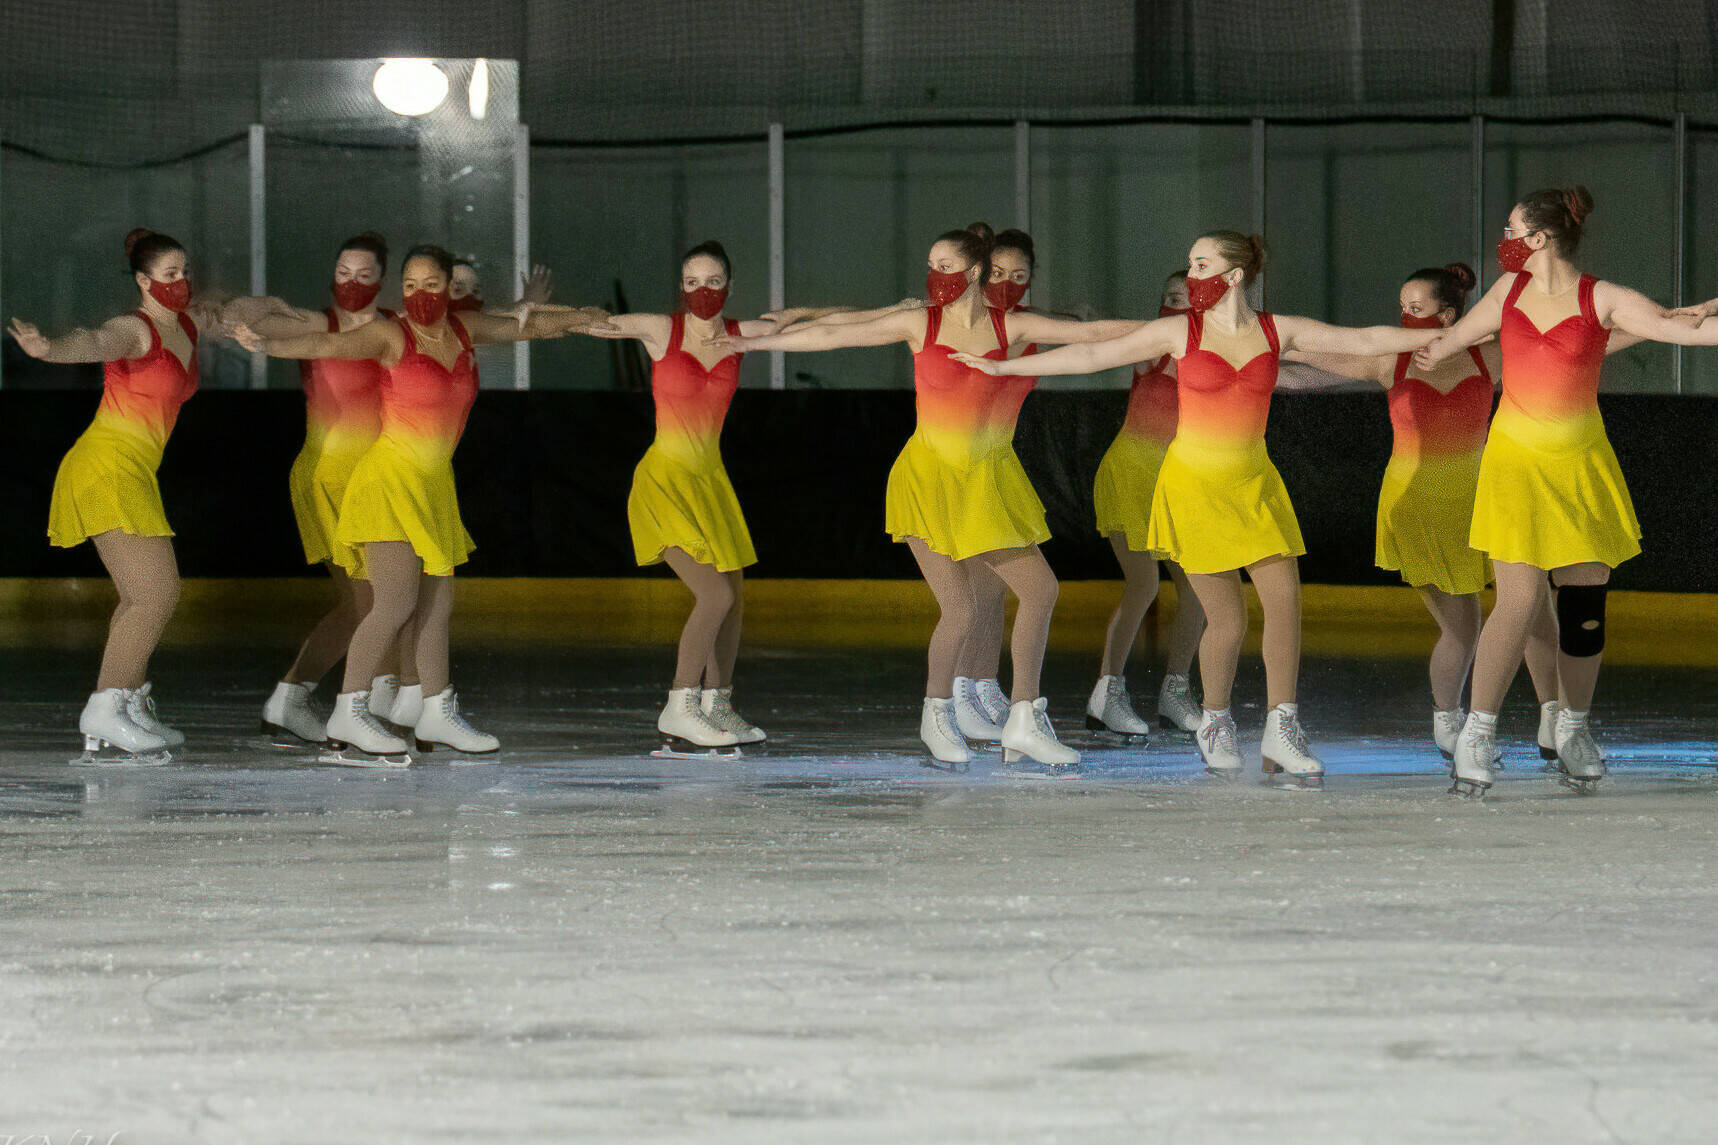 Juneau Skating Club Forget-Me-Not team featured in last year’s spring event. The team is traveling to Irvine, California to compete in the Glacier Falls Classic on Saturday, Nov. 12. (Courtesy Photo / Kim Hort)